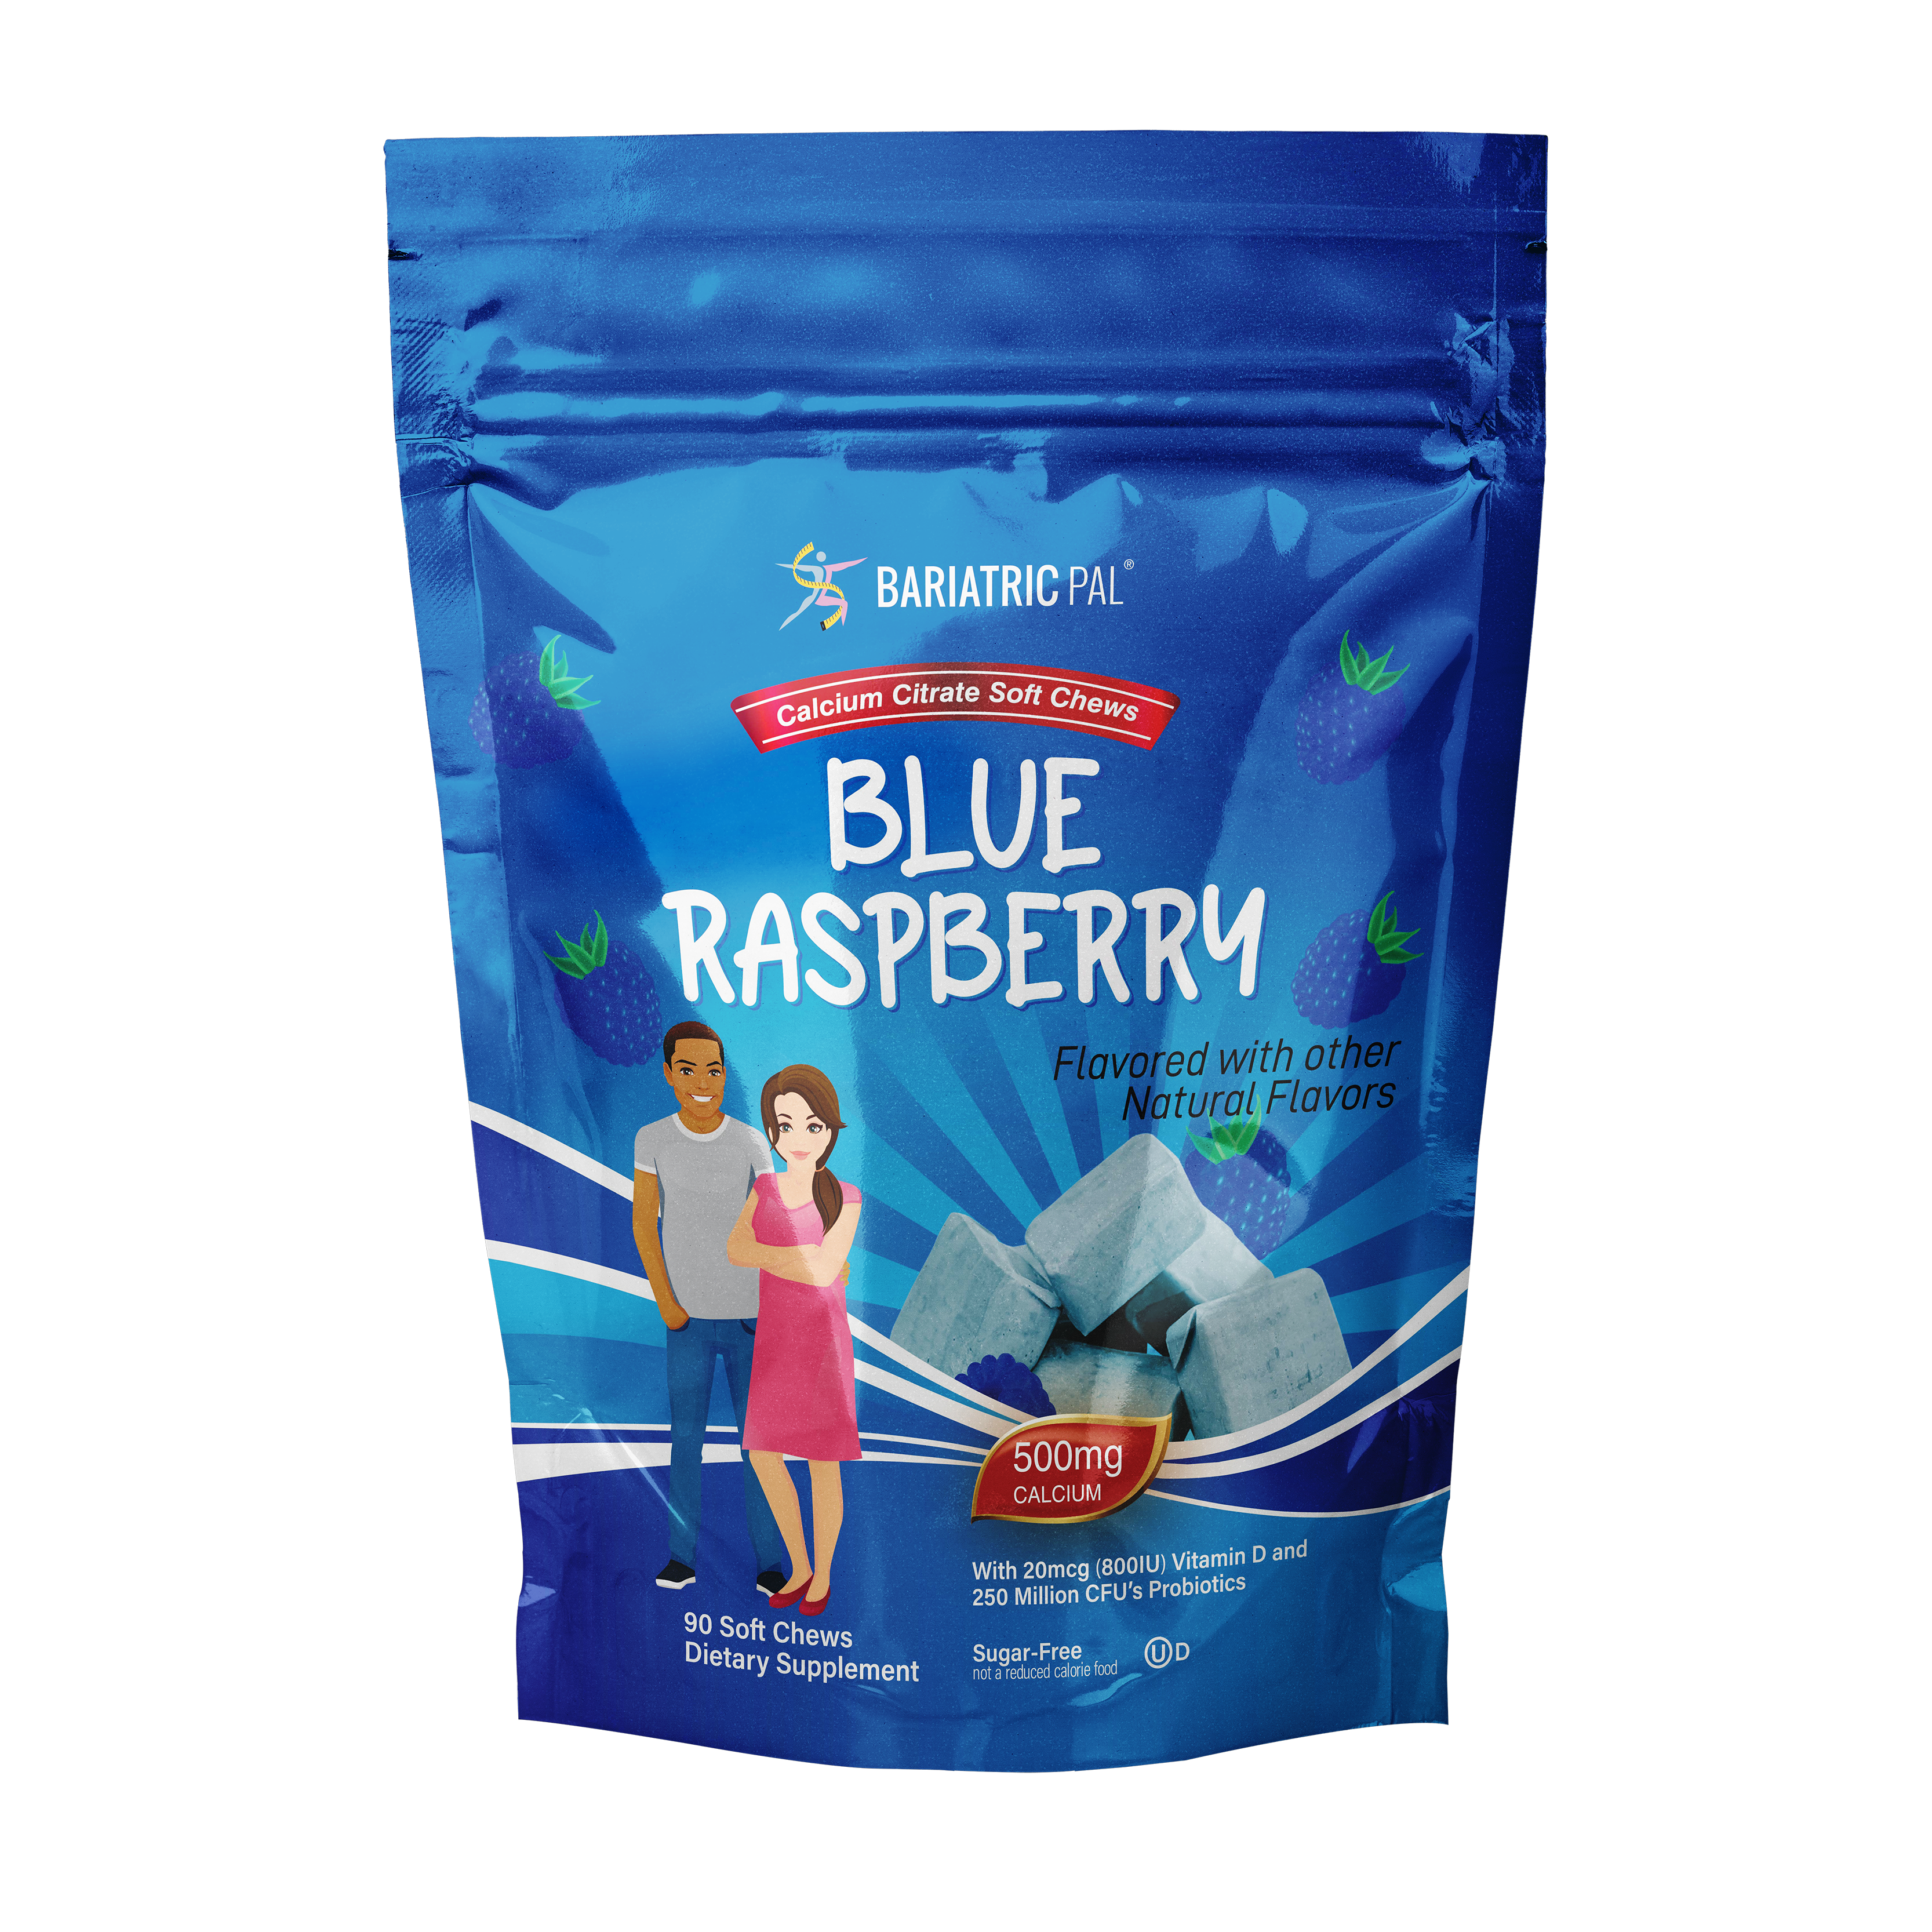 BariatricPal Sugar-Free Calcium Citrate Soft Chews 500mg with Probiotics - Blue Raspberry (NEW!) - High-quality Calcium by BariatricPal at 